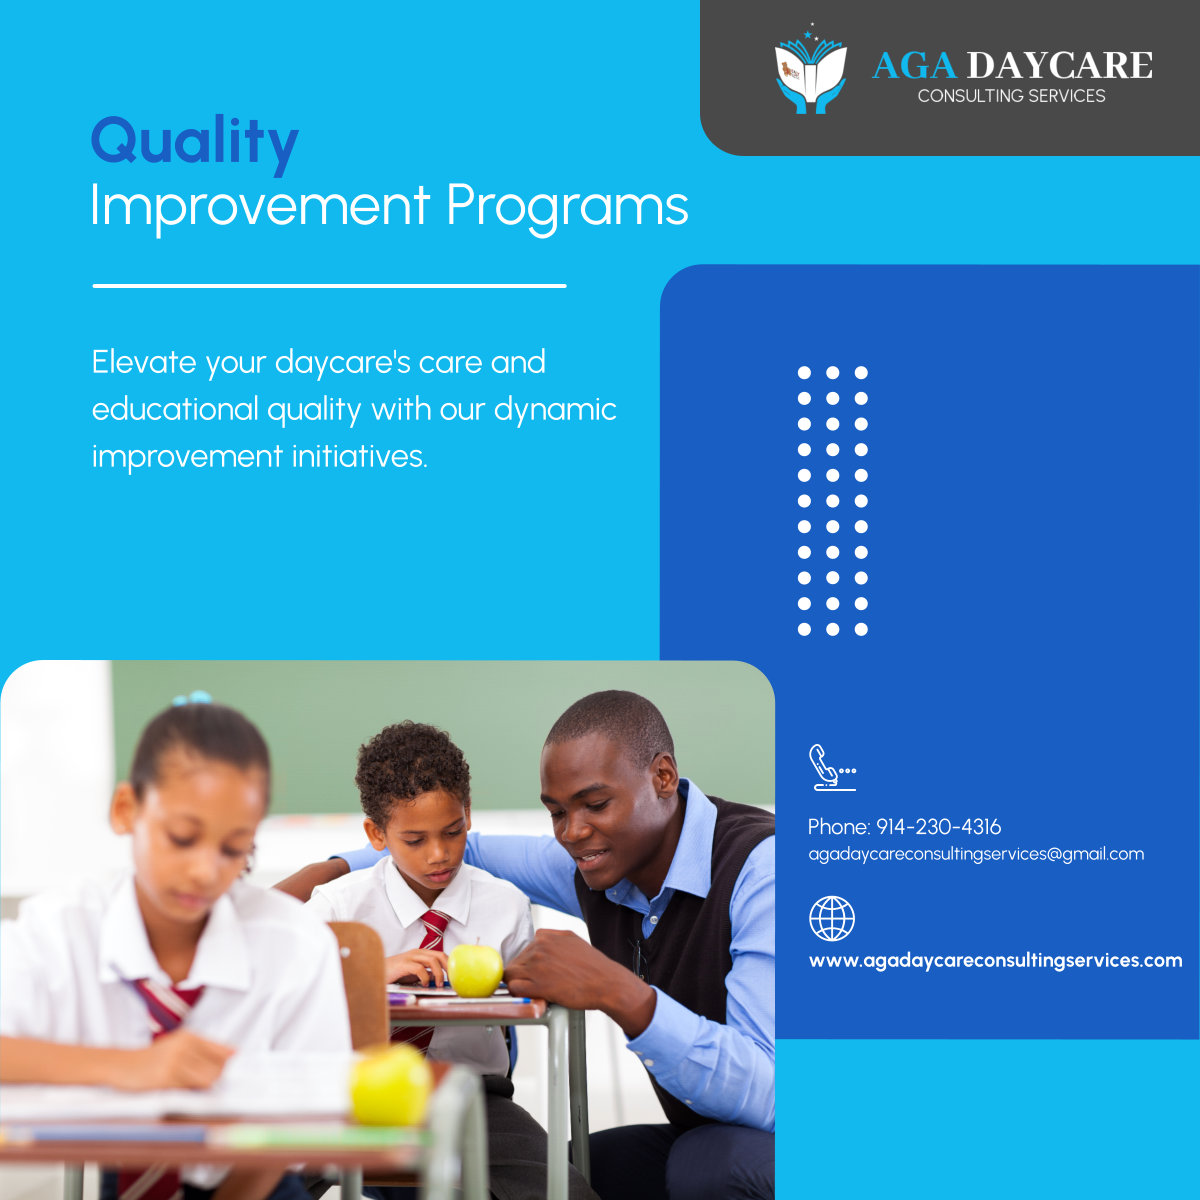 Experience transformative care with our quality improvement programs. Elevate your daycare to new heights of excellence! 

#NewRochelleNY #DaycareConsulting #QualityImprovement